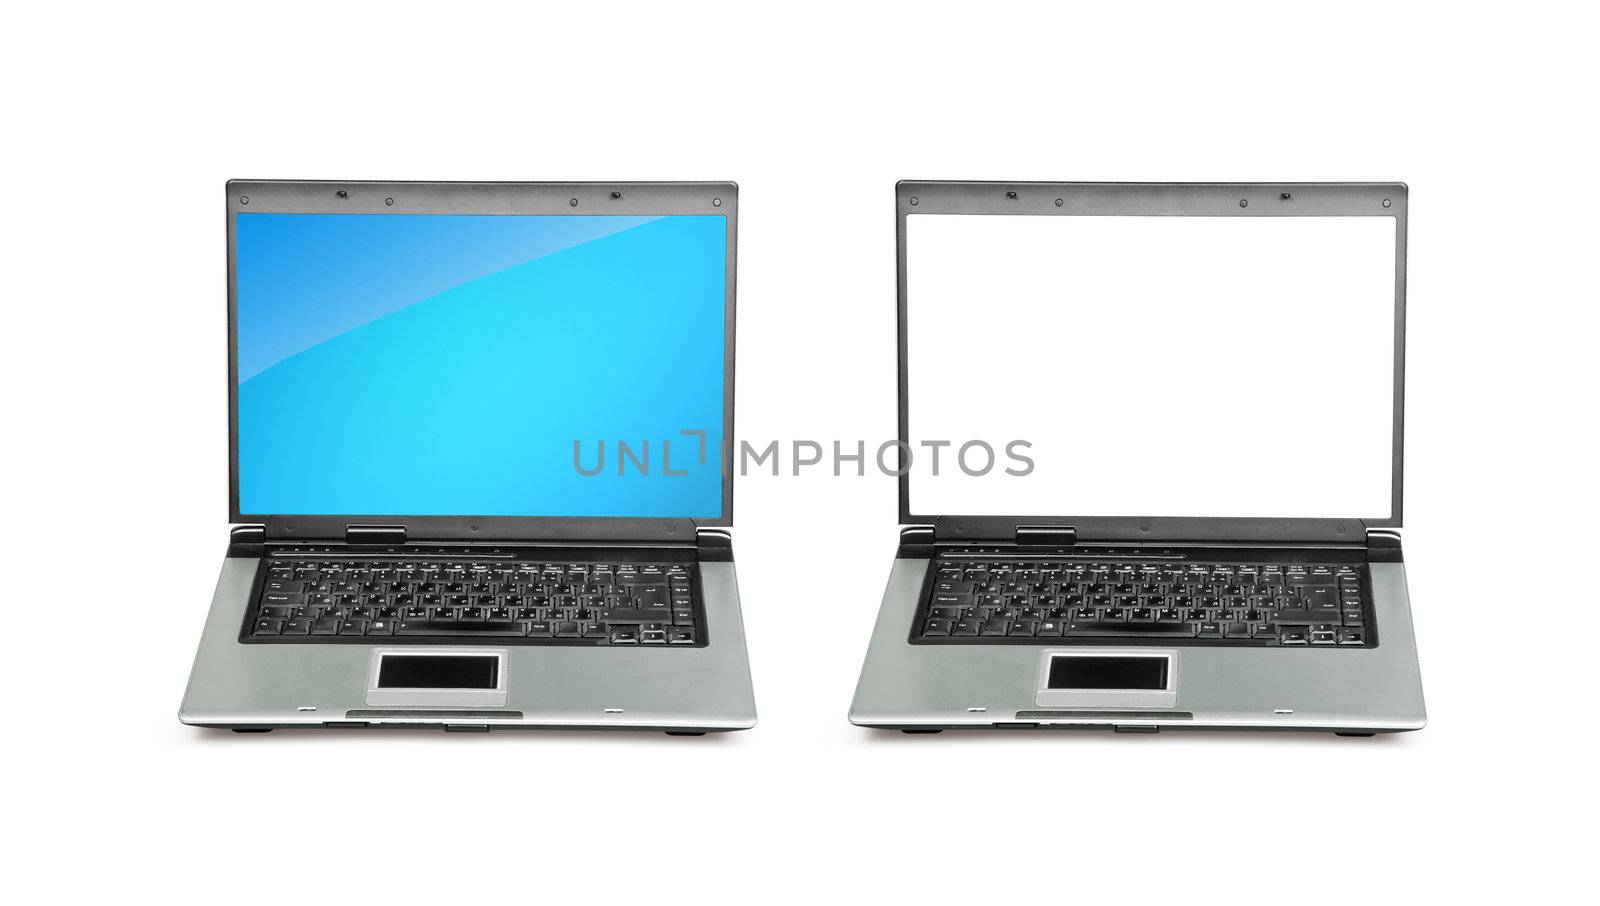 Open laptop showing keyboard and screen isolated on white background